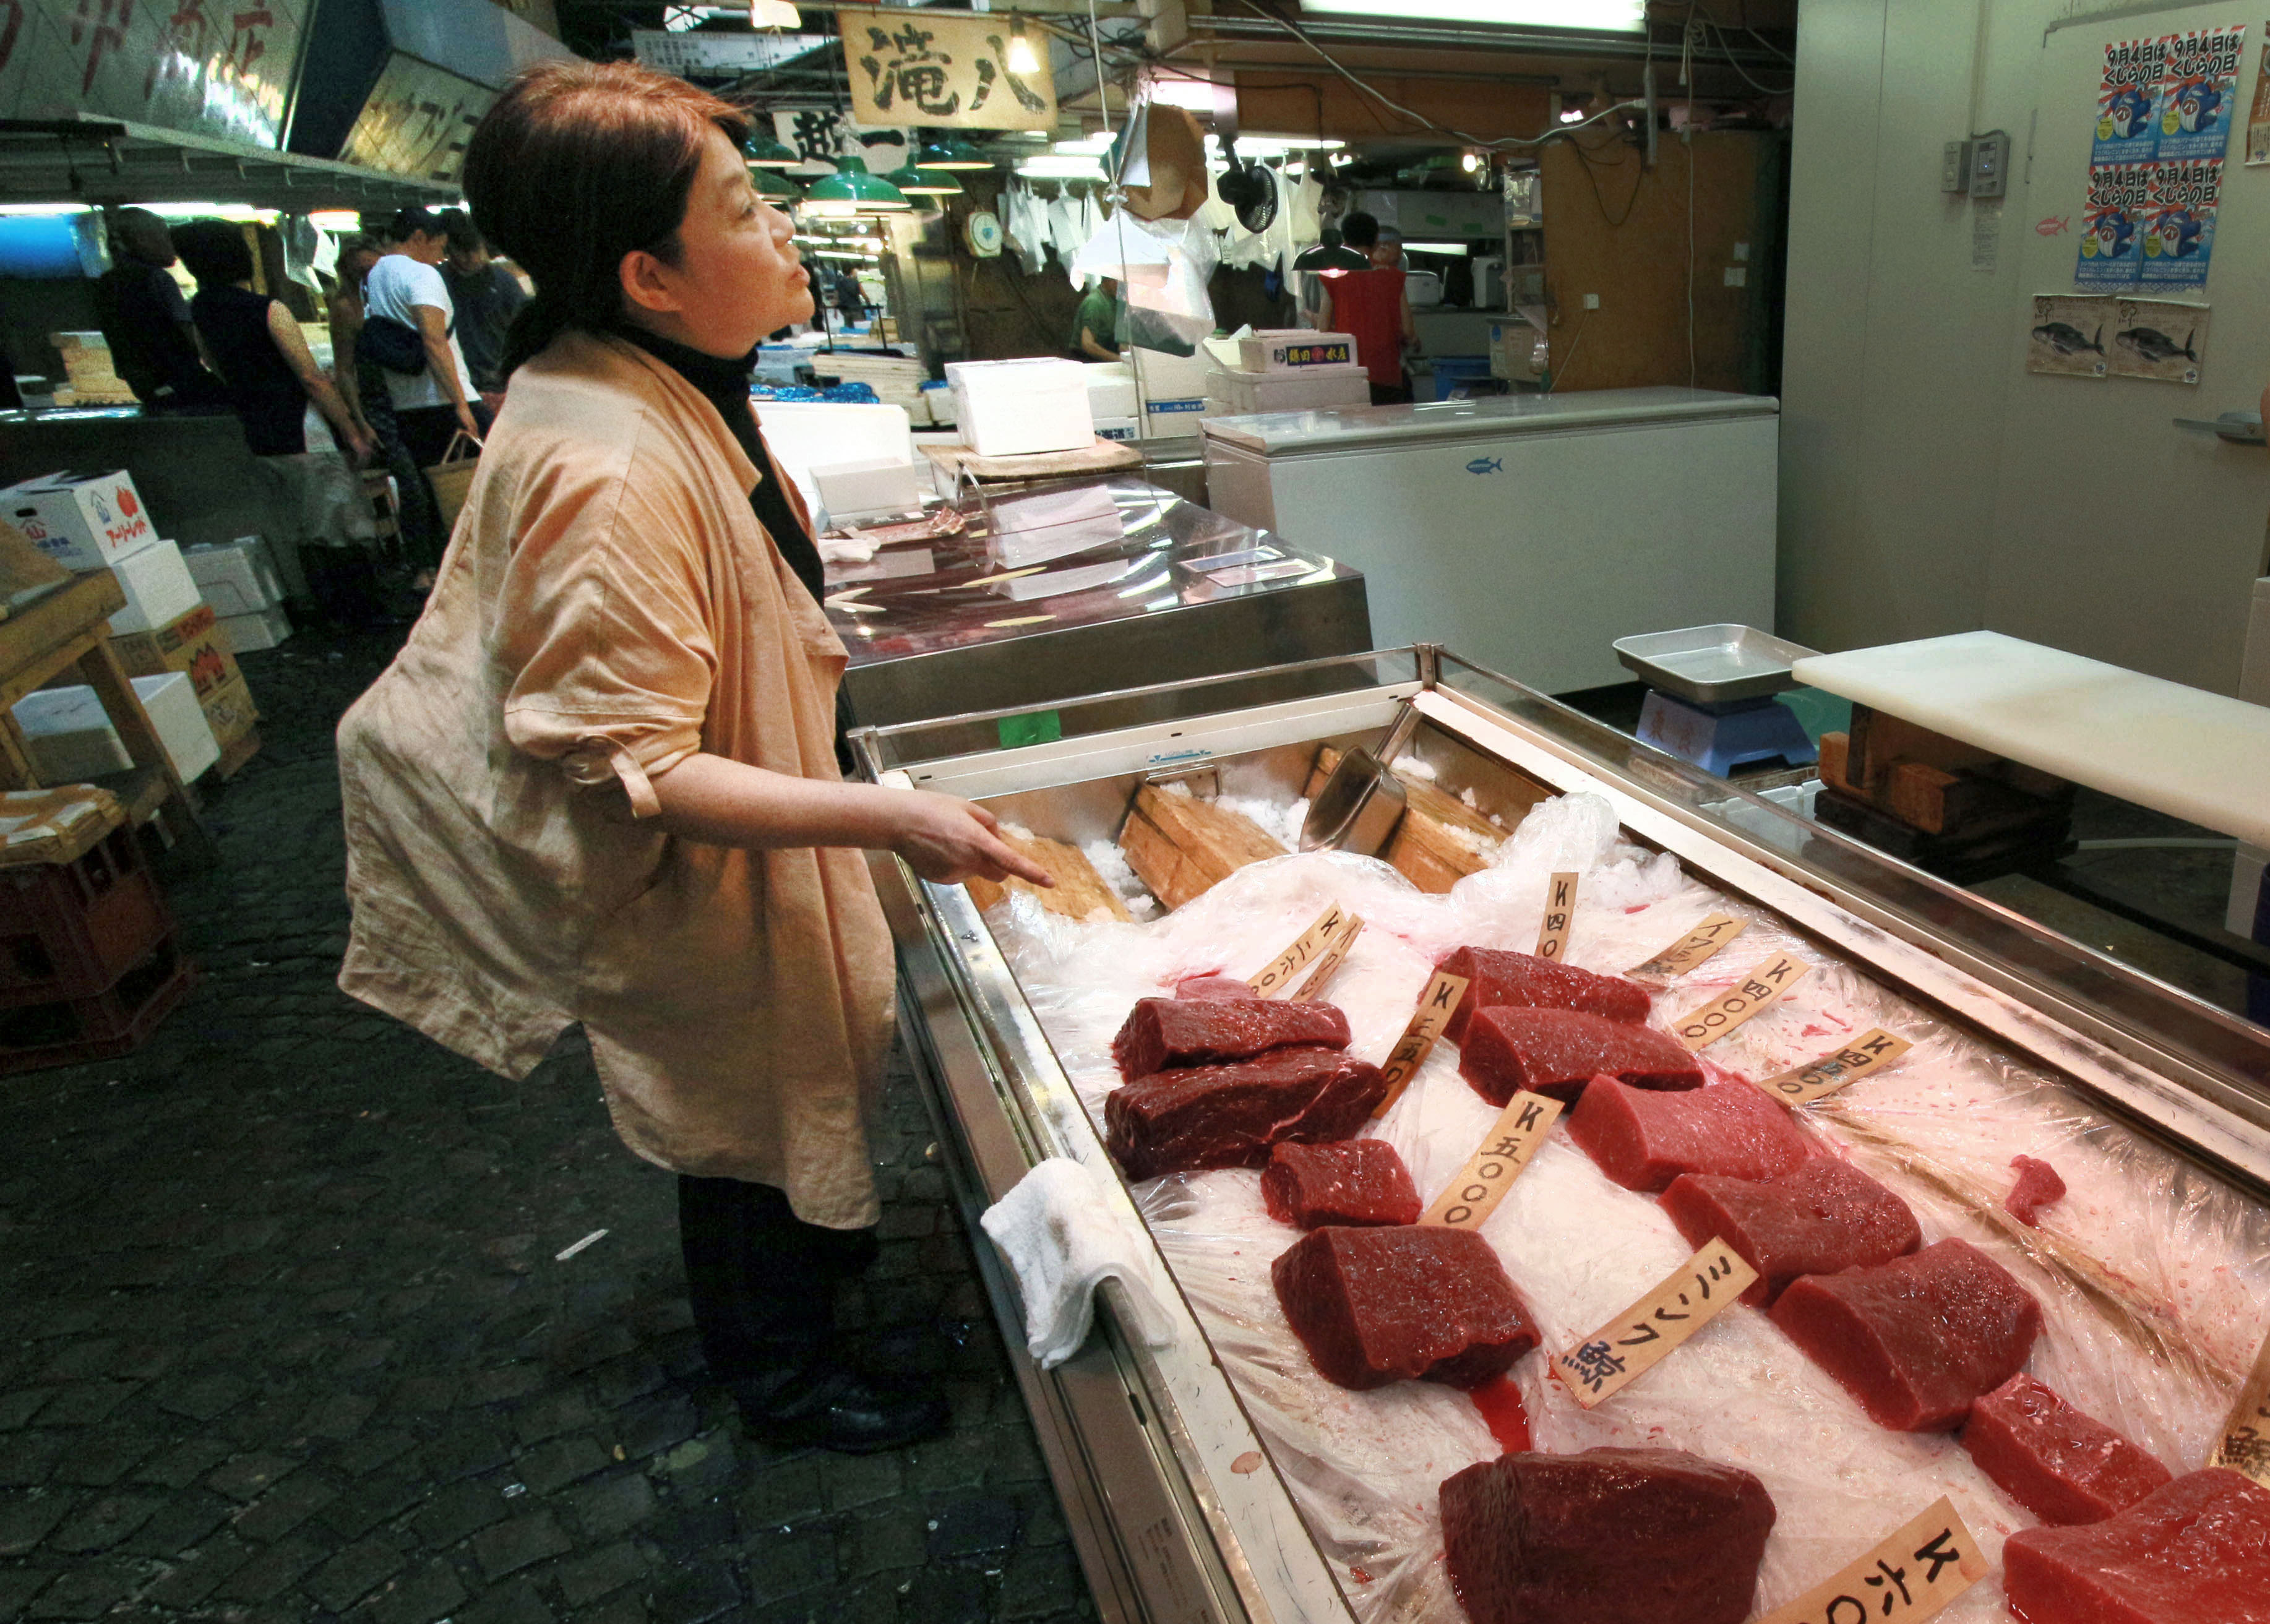 Junko Sakuma visits a store selling whale meat in the Tsukiji fish market in Tokyo on Aug. 5. She says annual consumption in Japan is less than 30 grams per person. | KYODO